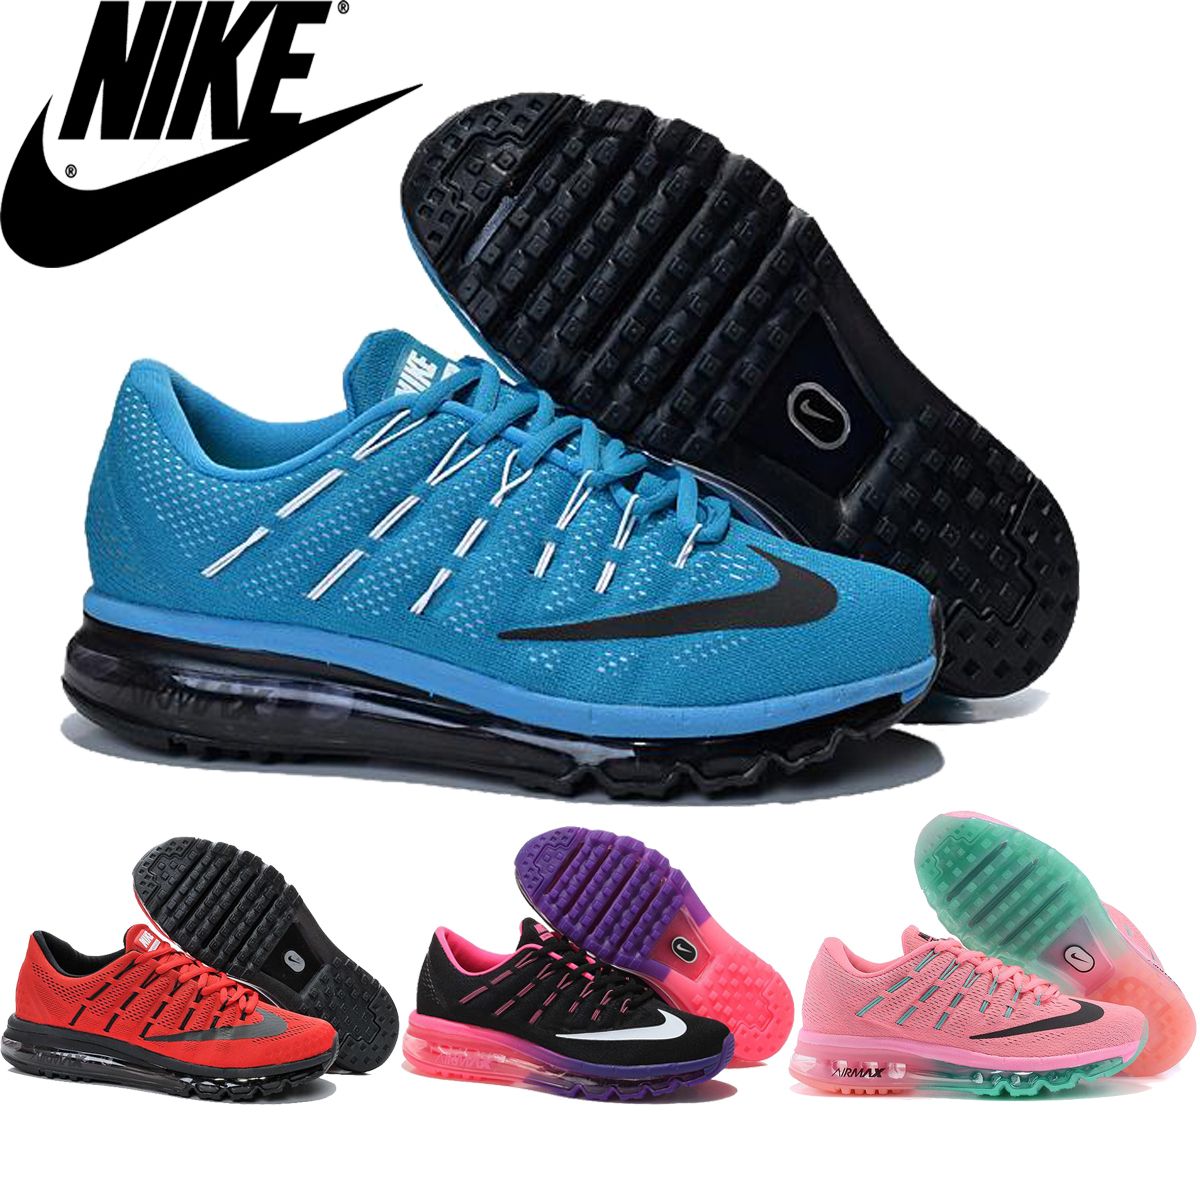 Suppose sketch bond Nike Air Max 2016 Gs Womens Running Shoe Black/Pink Pow/Volt/Reflect Silver,Original  Air Maxes Airmax 2016 For Women Sports Shoes From Bestsportcentre, $113.99  | DHgate Israel